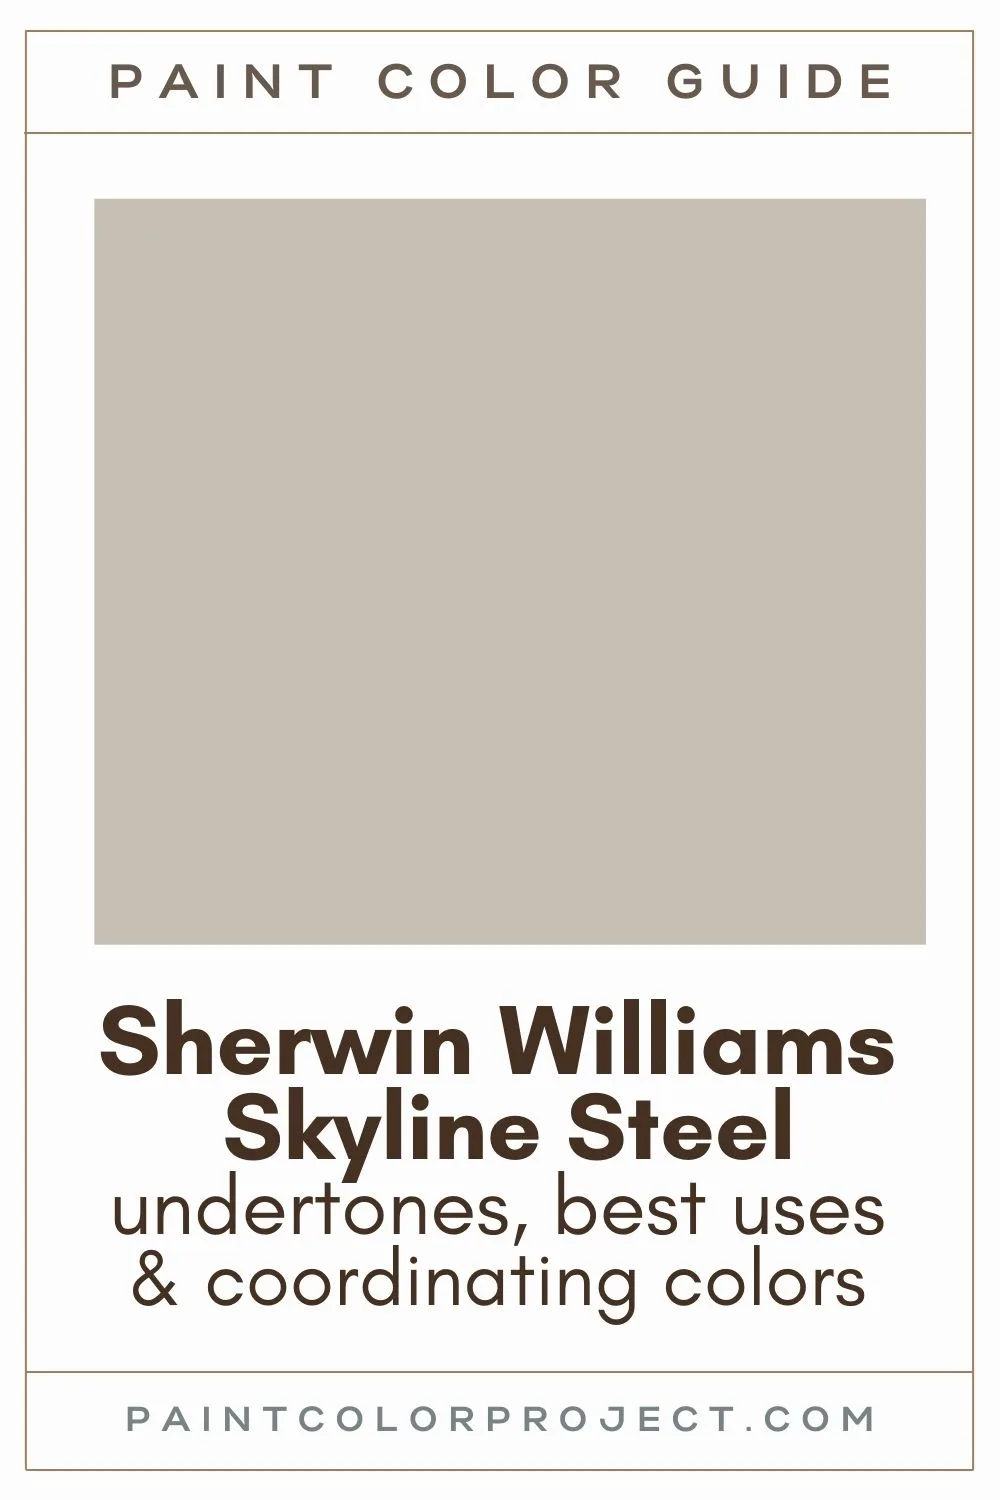 Sherwin Williams Skyline Steel paint color guide